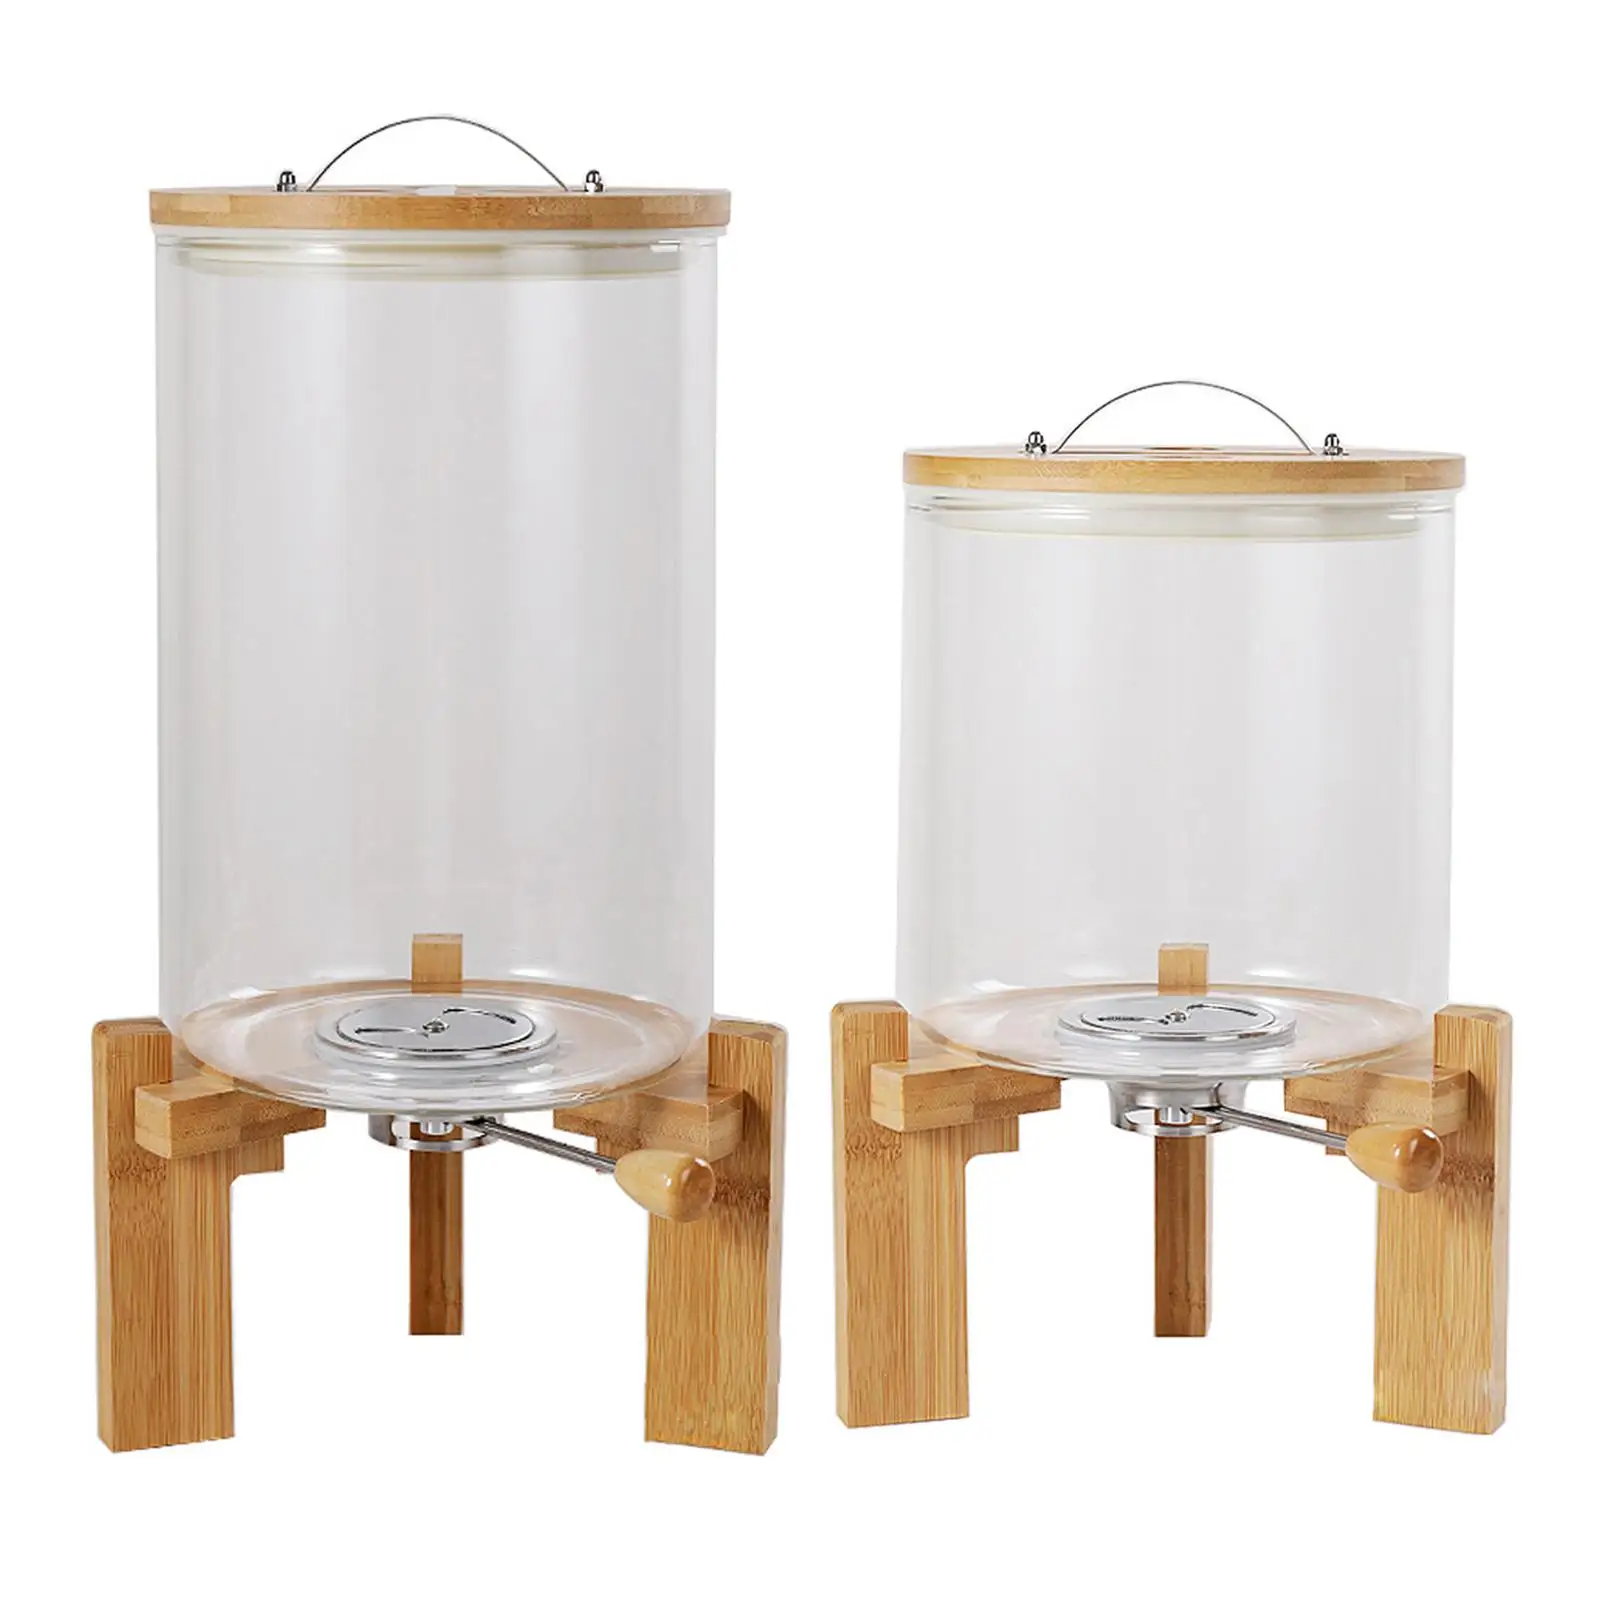 Glss Cerel Continer Seled Bucket with Wood Stnd Portble Insect Proof Rice Dispenser for Grin Pntry Store Sugr Flour